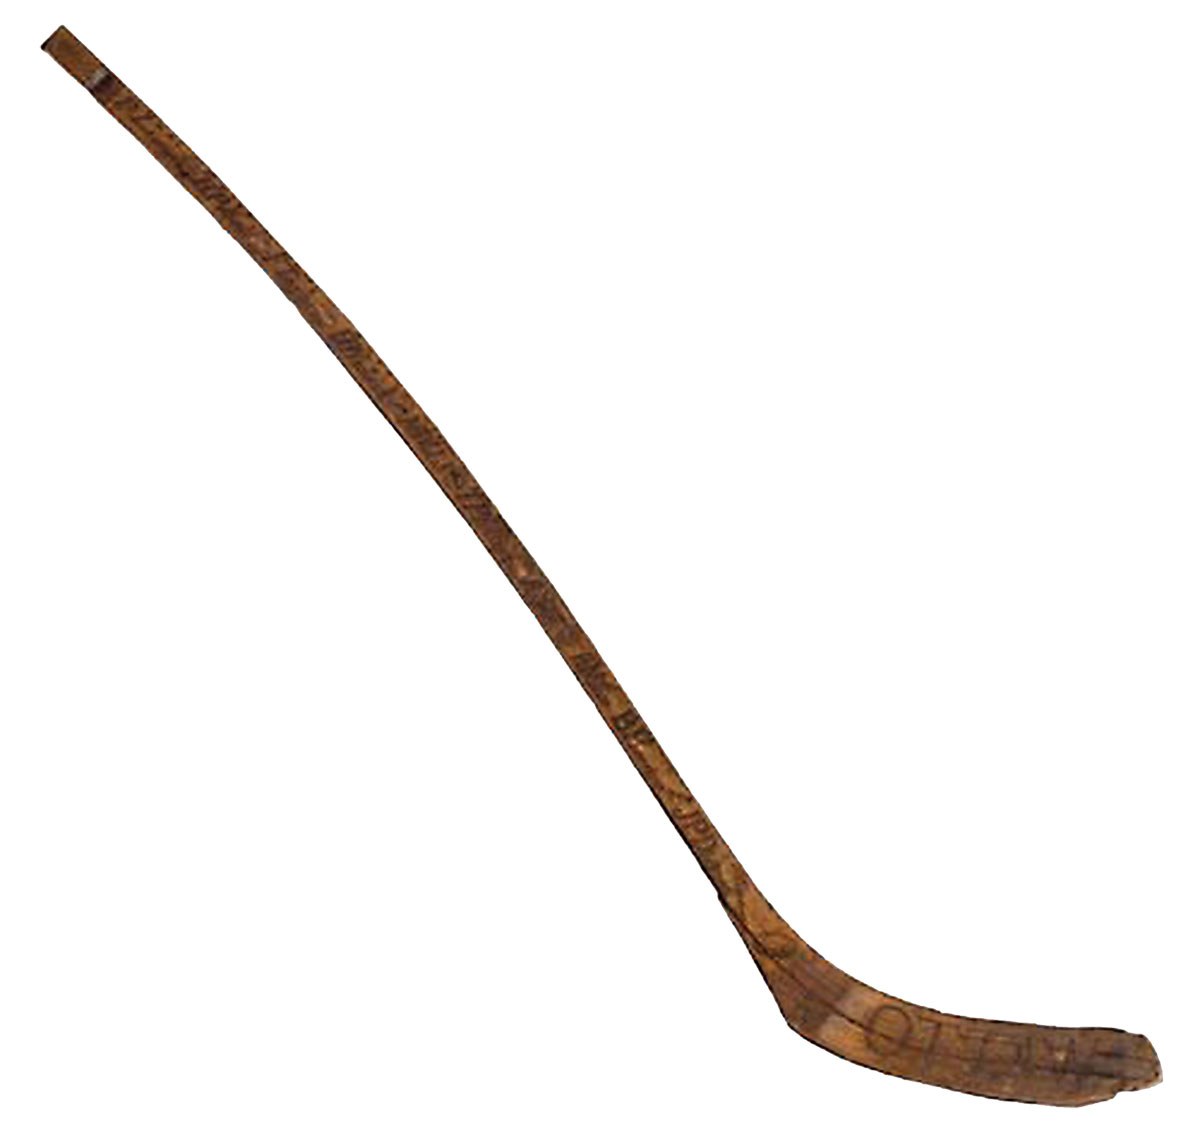 Stick handling: The evolution of an icon